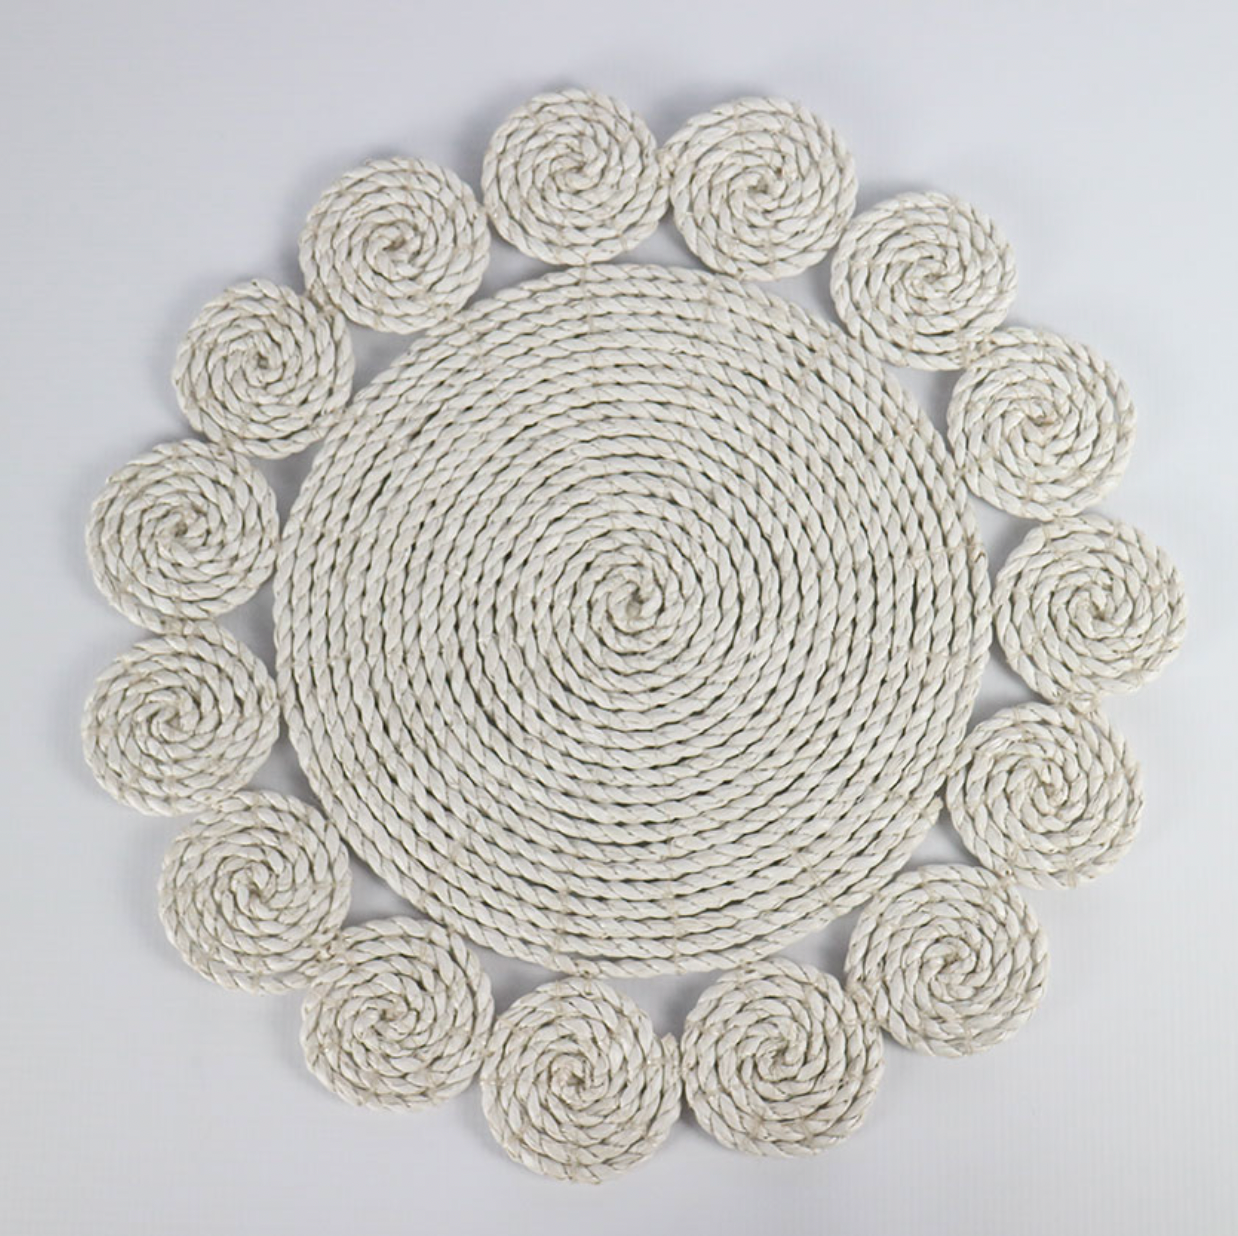 Flower Seagrass Placemats